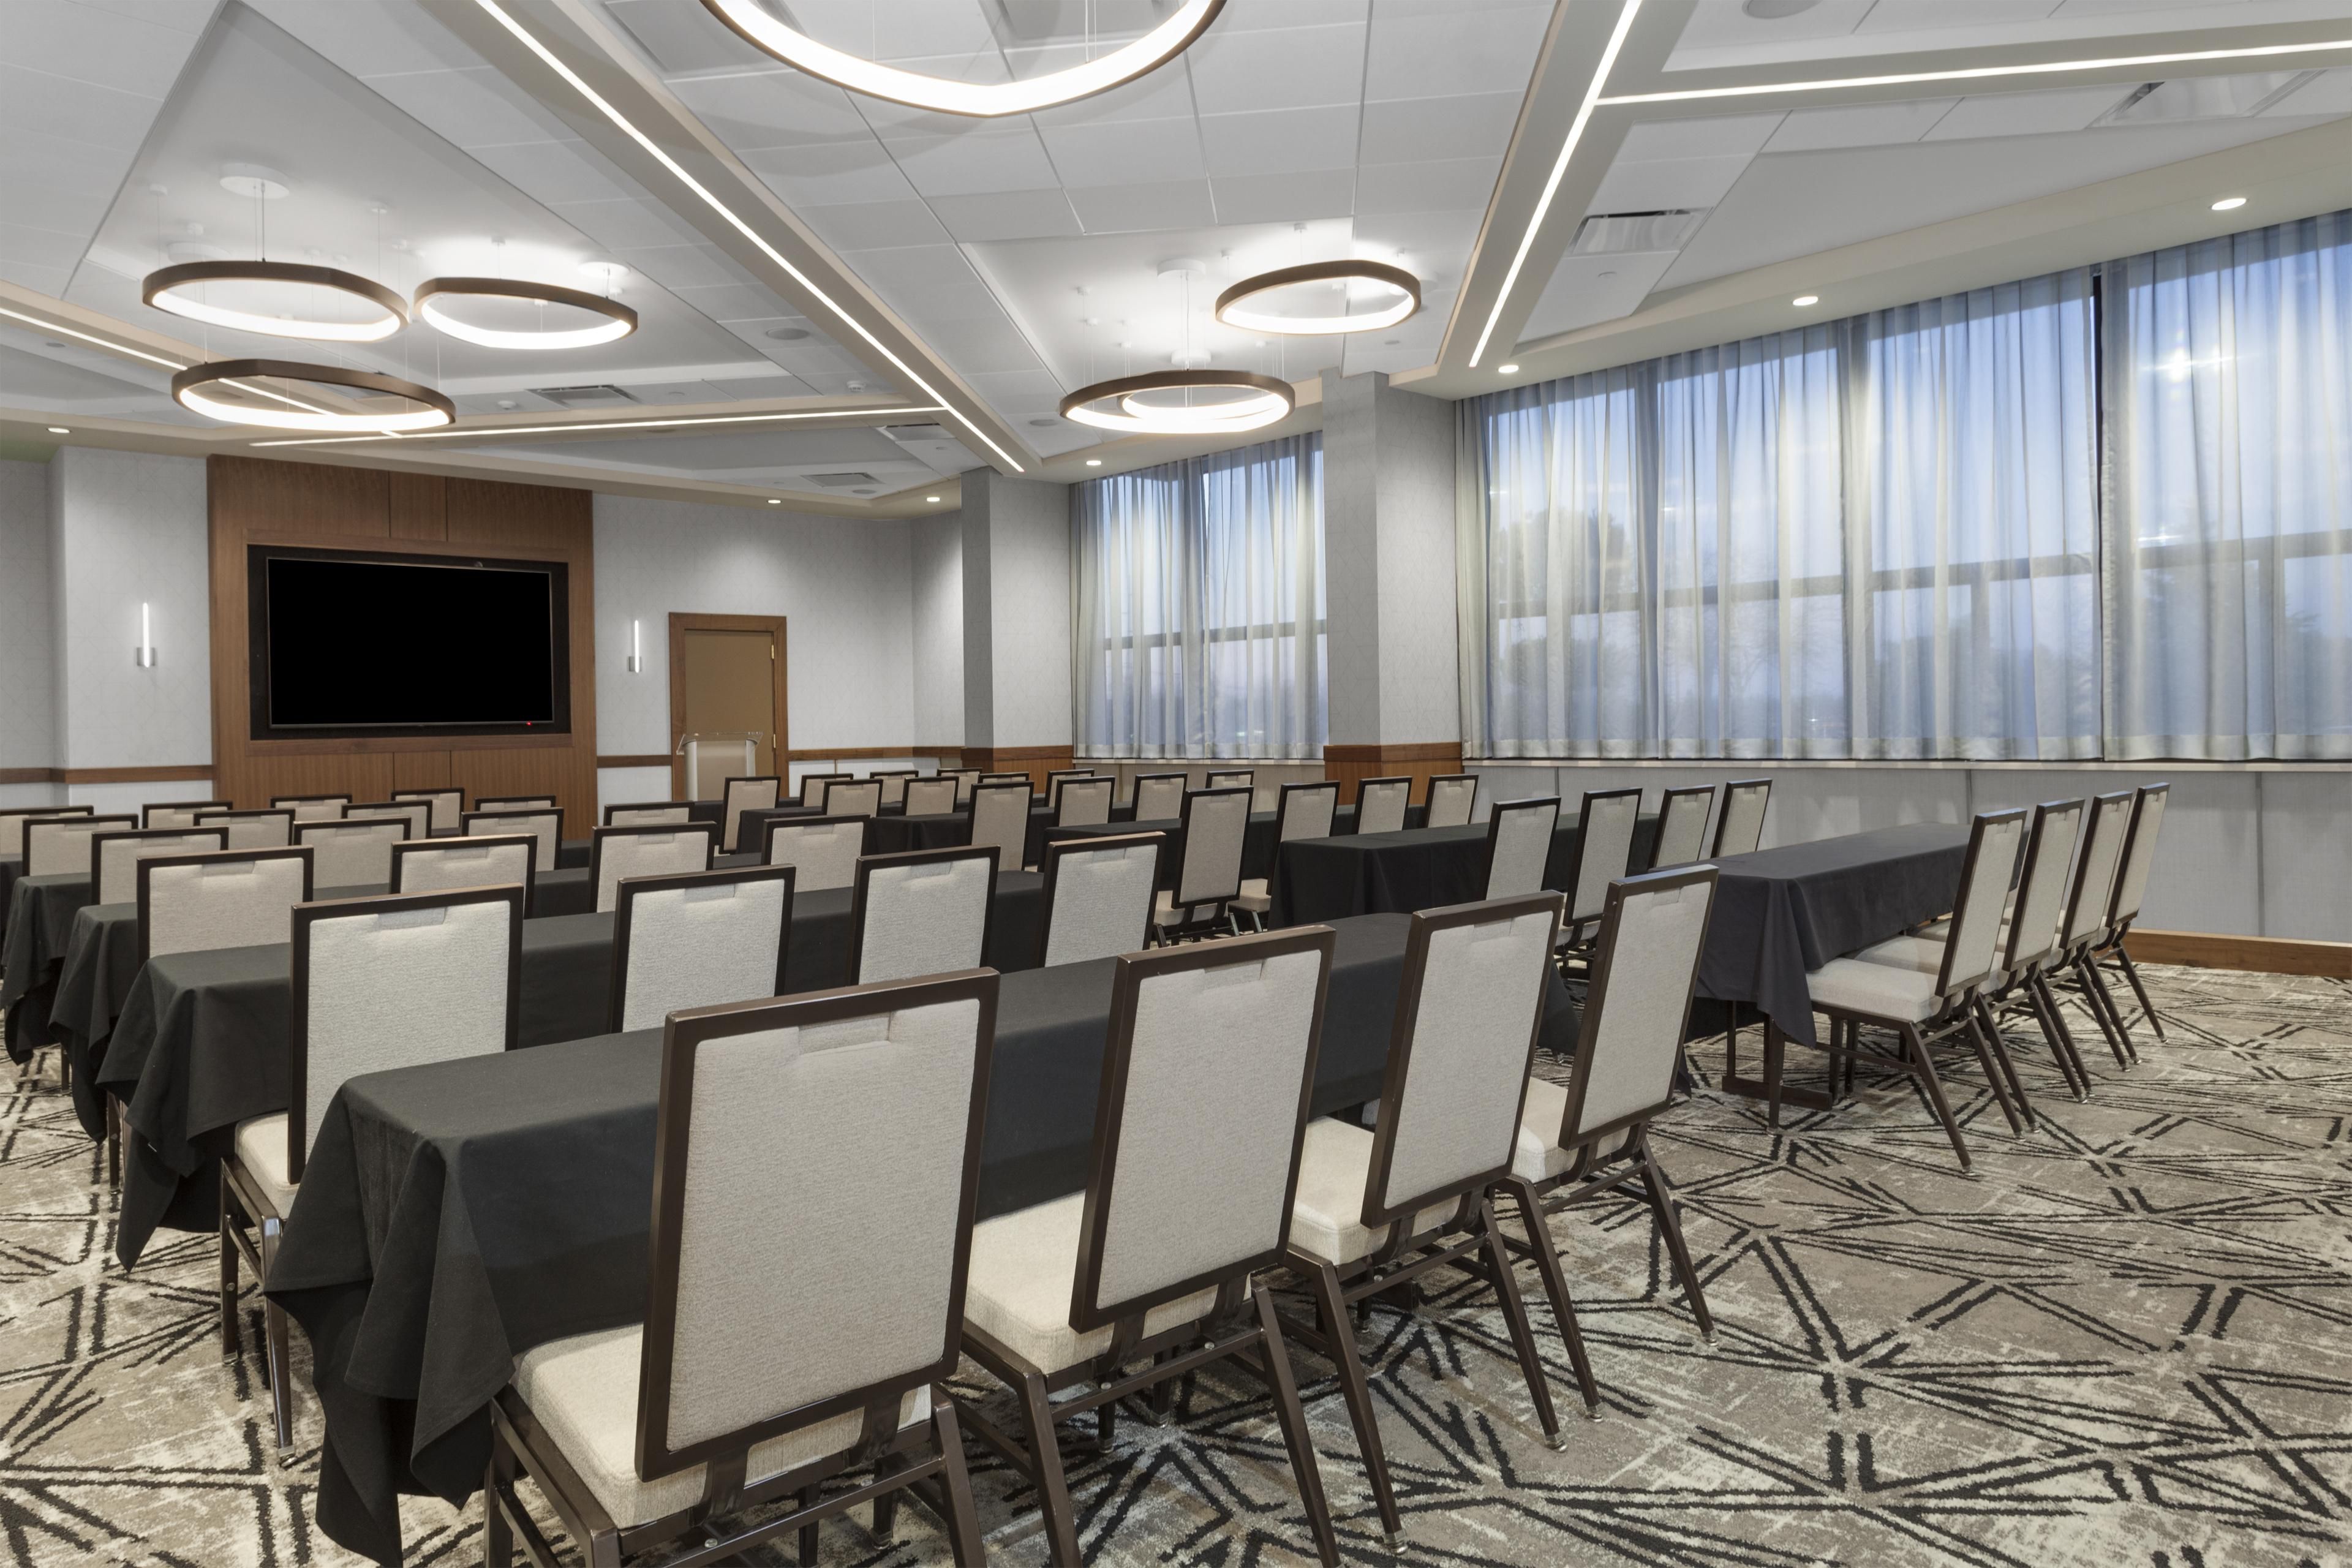 Reo meeting room at Crowne Plaza Lansing West designed for 110 guests